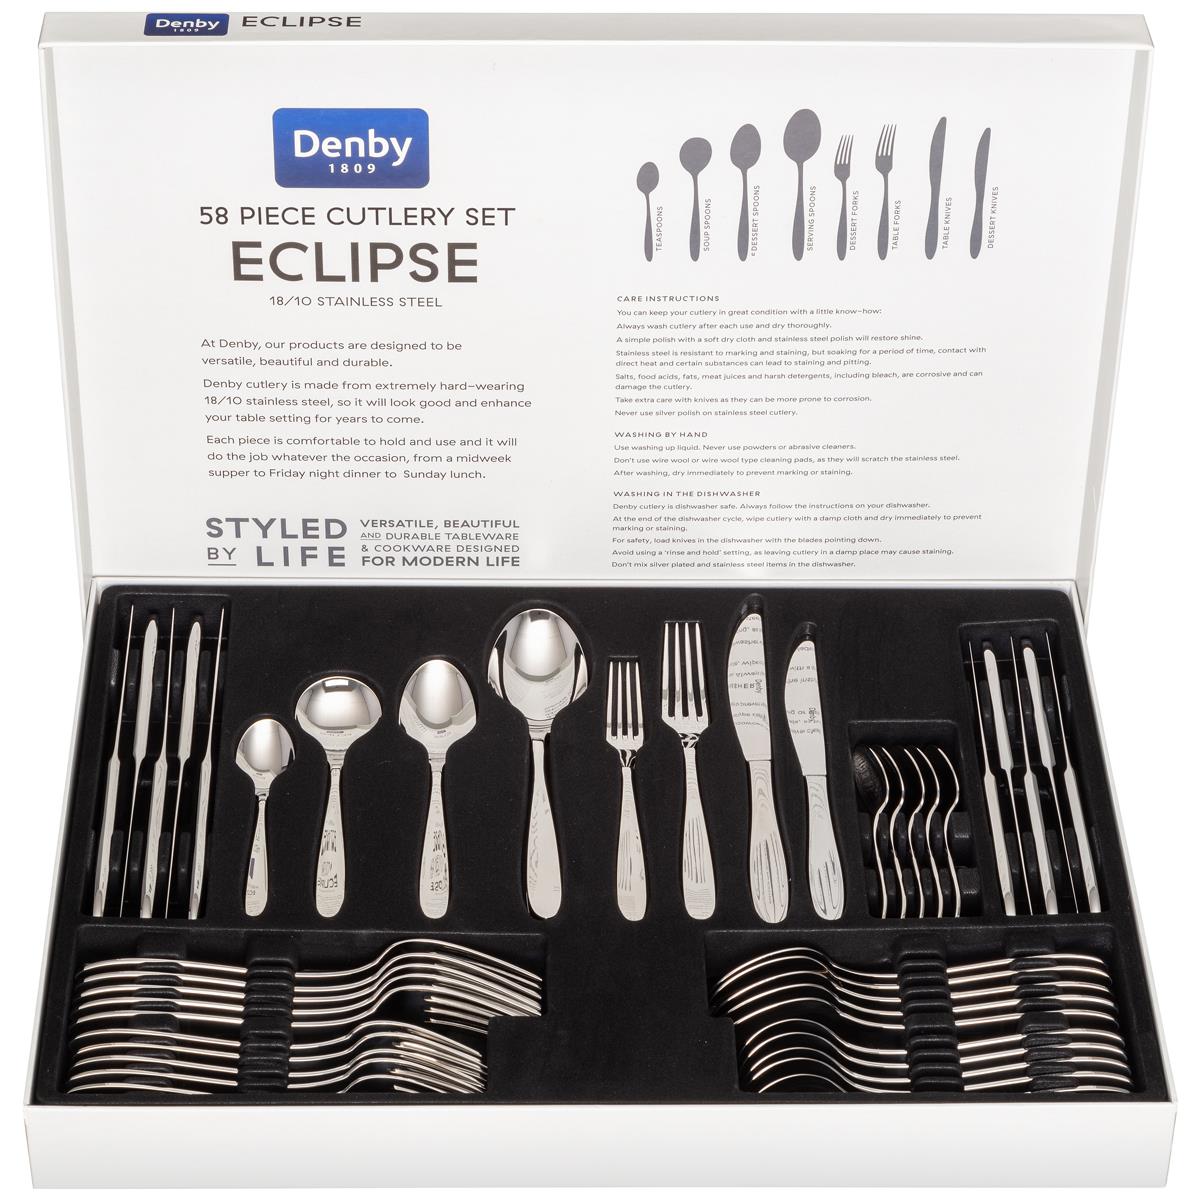 Denby Eclipse 58 Piece Cutlery Set Questions & Answers